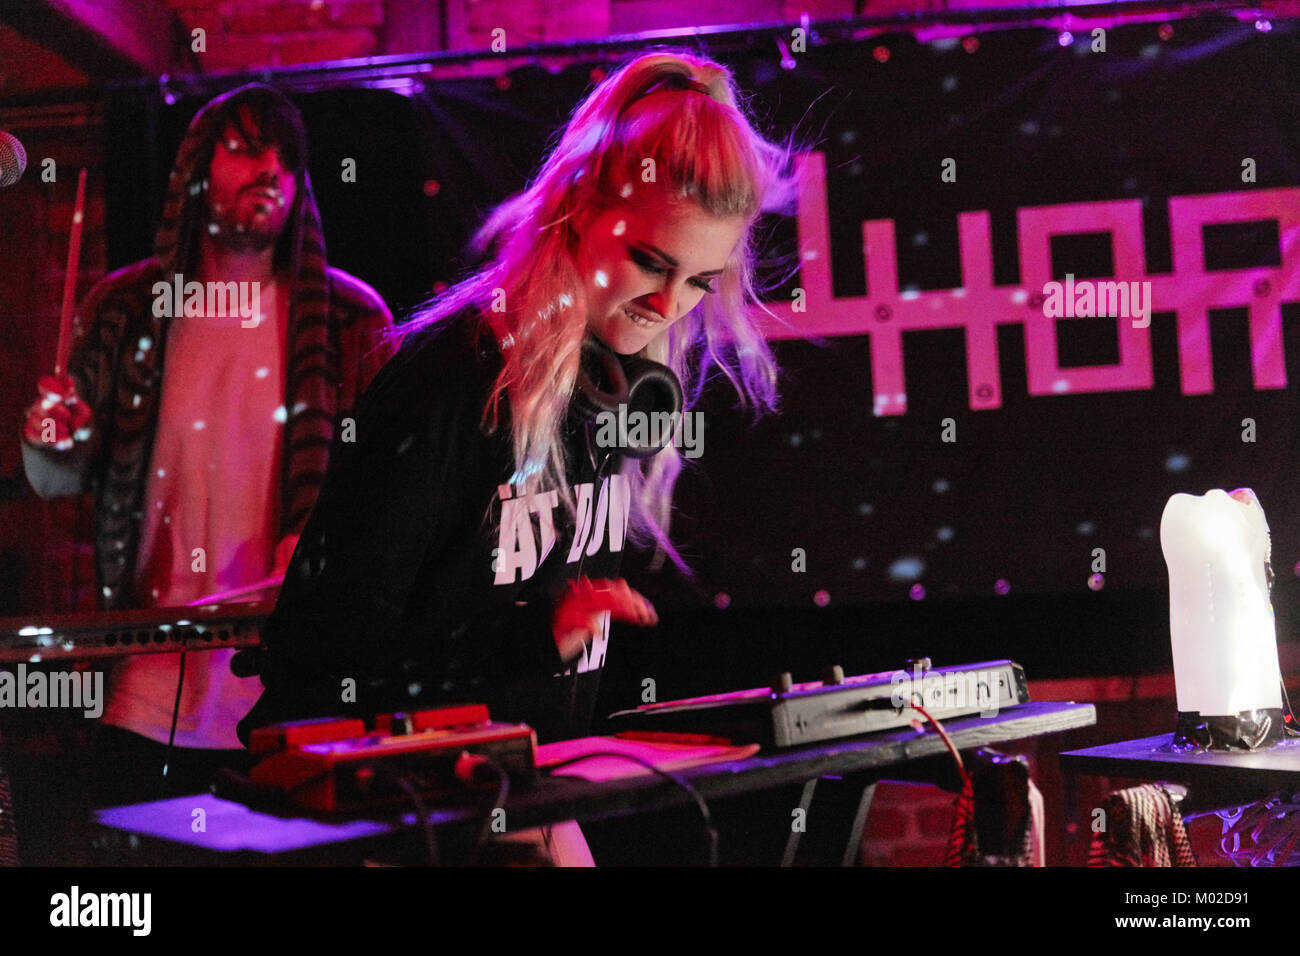 The Swedish electro pop band RABBI (Revolutions Are Best Before Initial Inception) performs a concert at the Uhørt Stage during the Norwegian showcase festival and music conference by:Larm 2016 in Oslo. The duo consists of Johanna Bergnlund and Felix Persson. Norway, 05/03 2016. Stock Photo